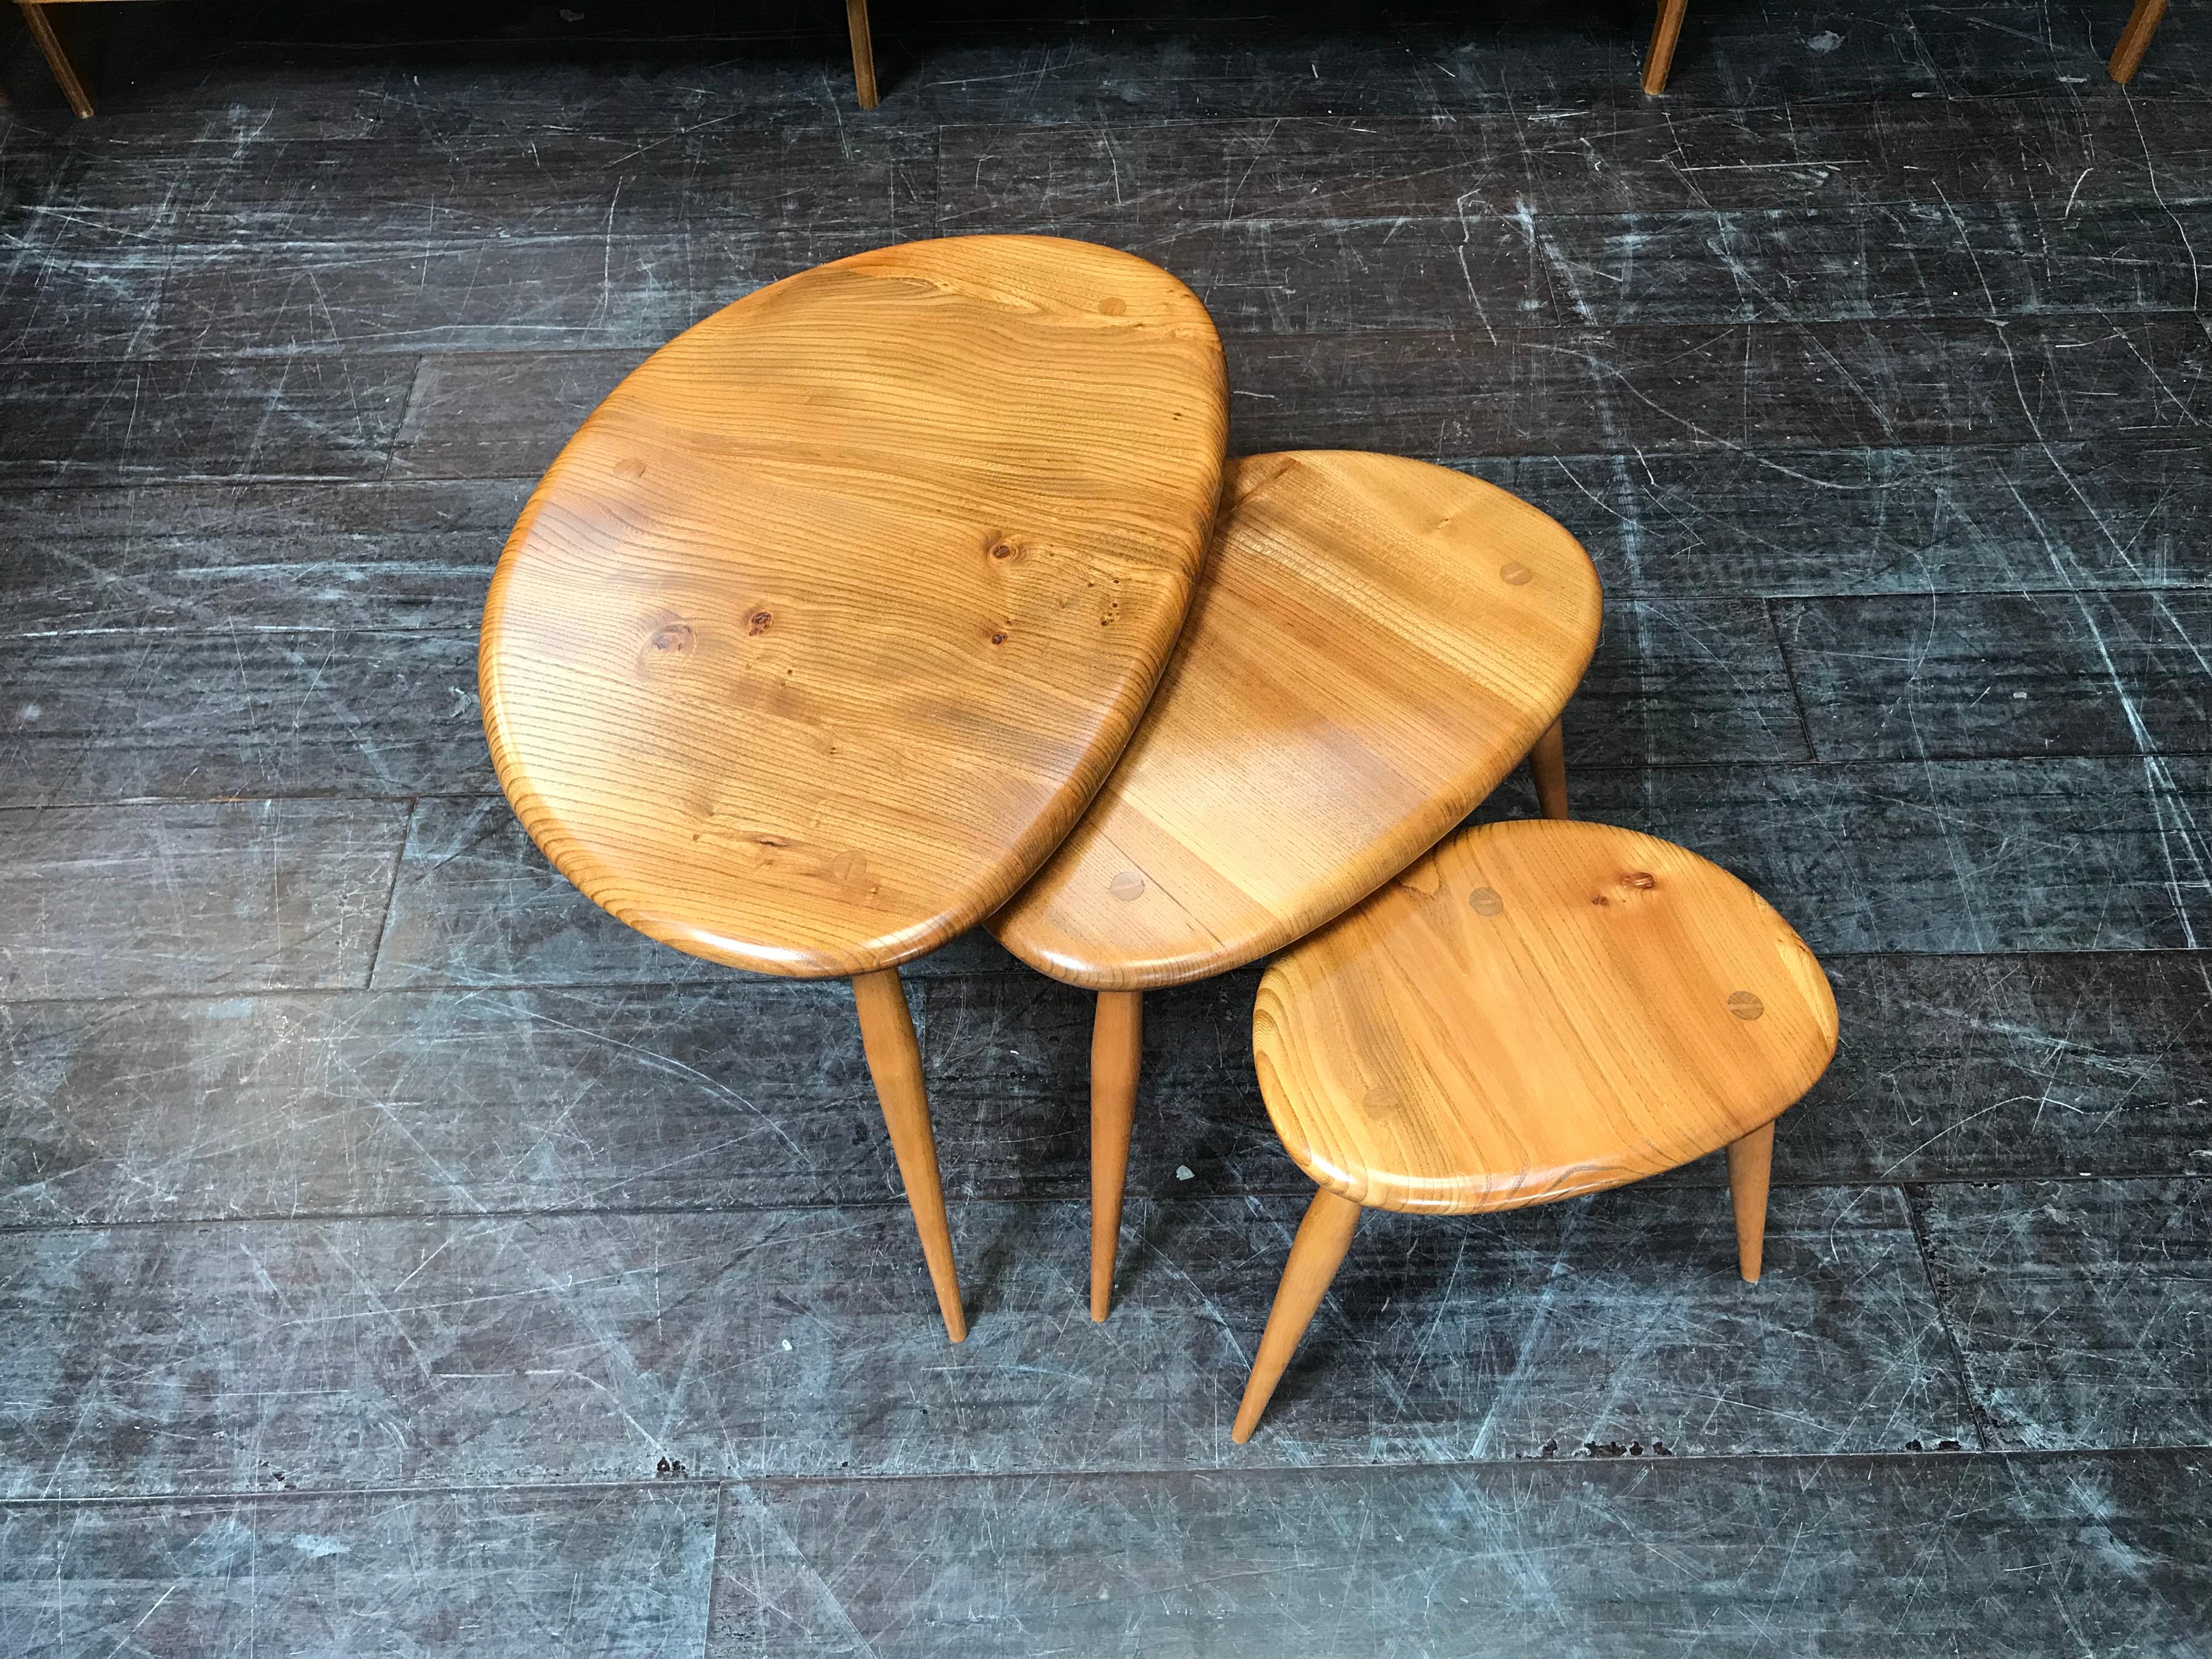 This nest of three tables, known as ‘Pebbles’, has been handcrafted from solid elm and beech. They represent iconic midcentury design, with their organically-curved pebble shaped tops and three distinctive slender, splayed legs. These Pebbles are a